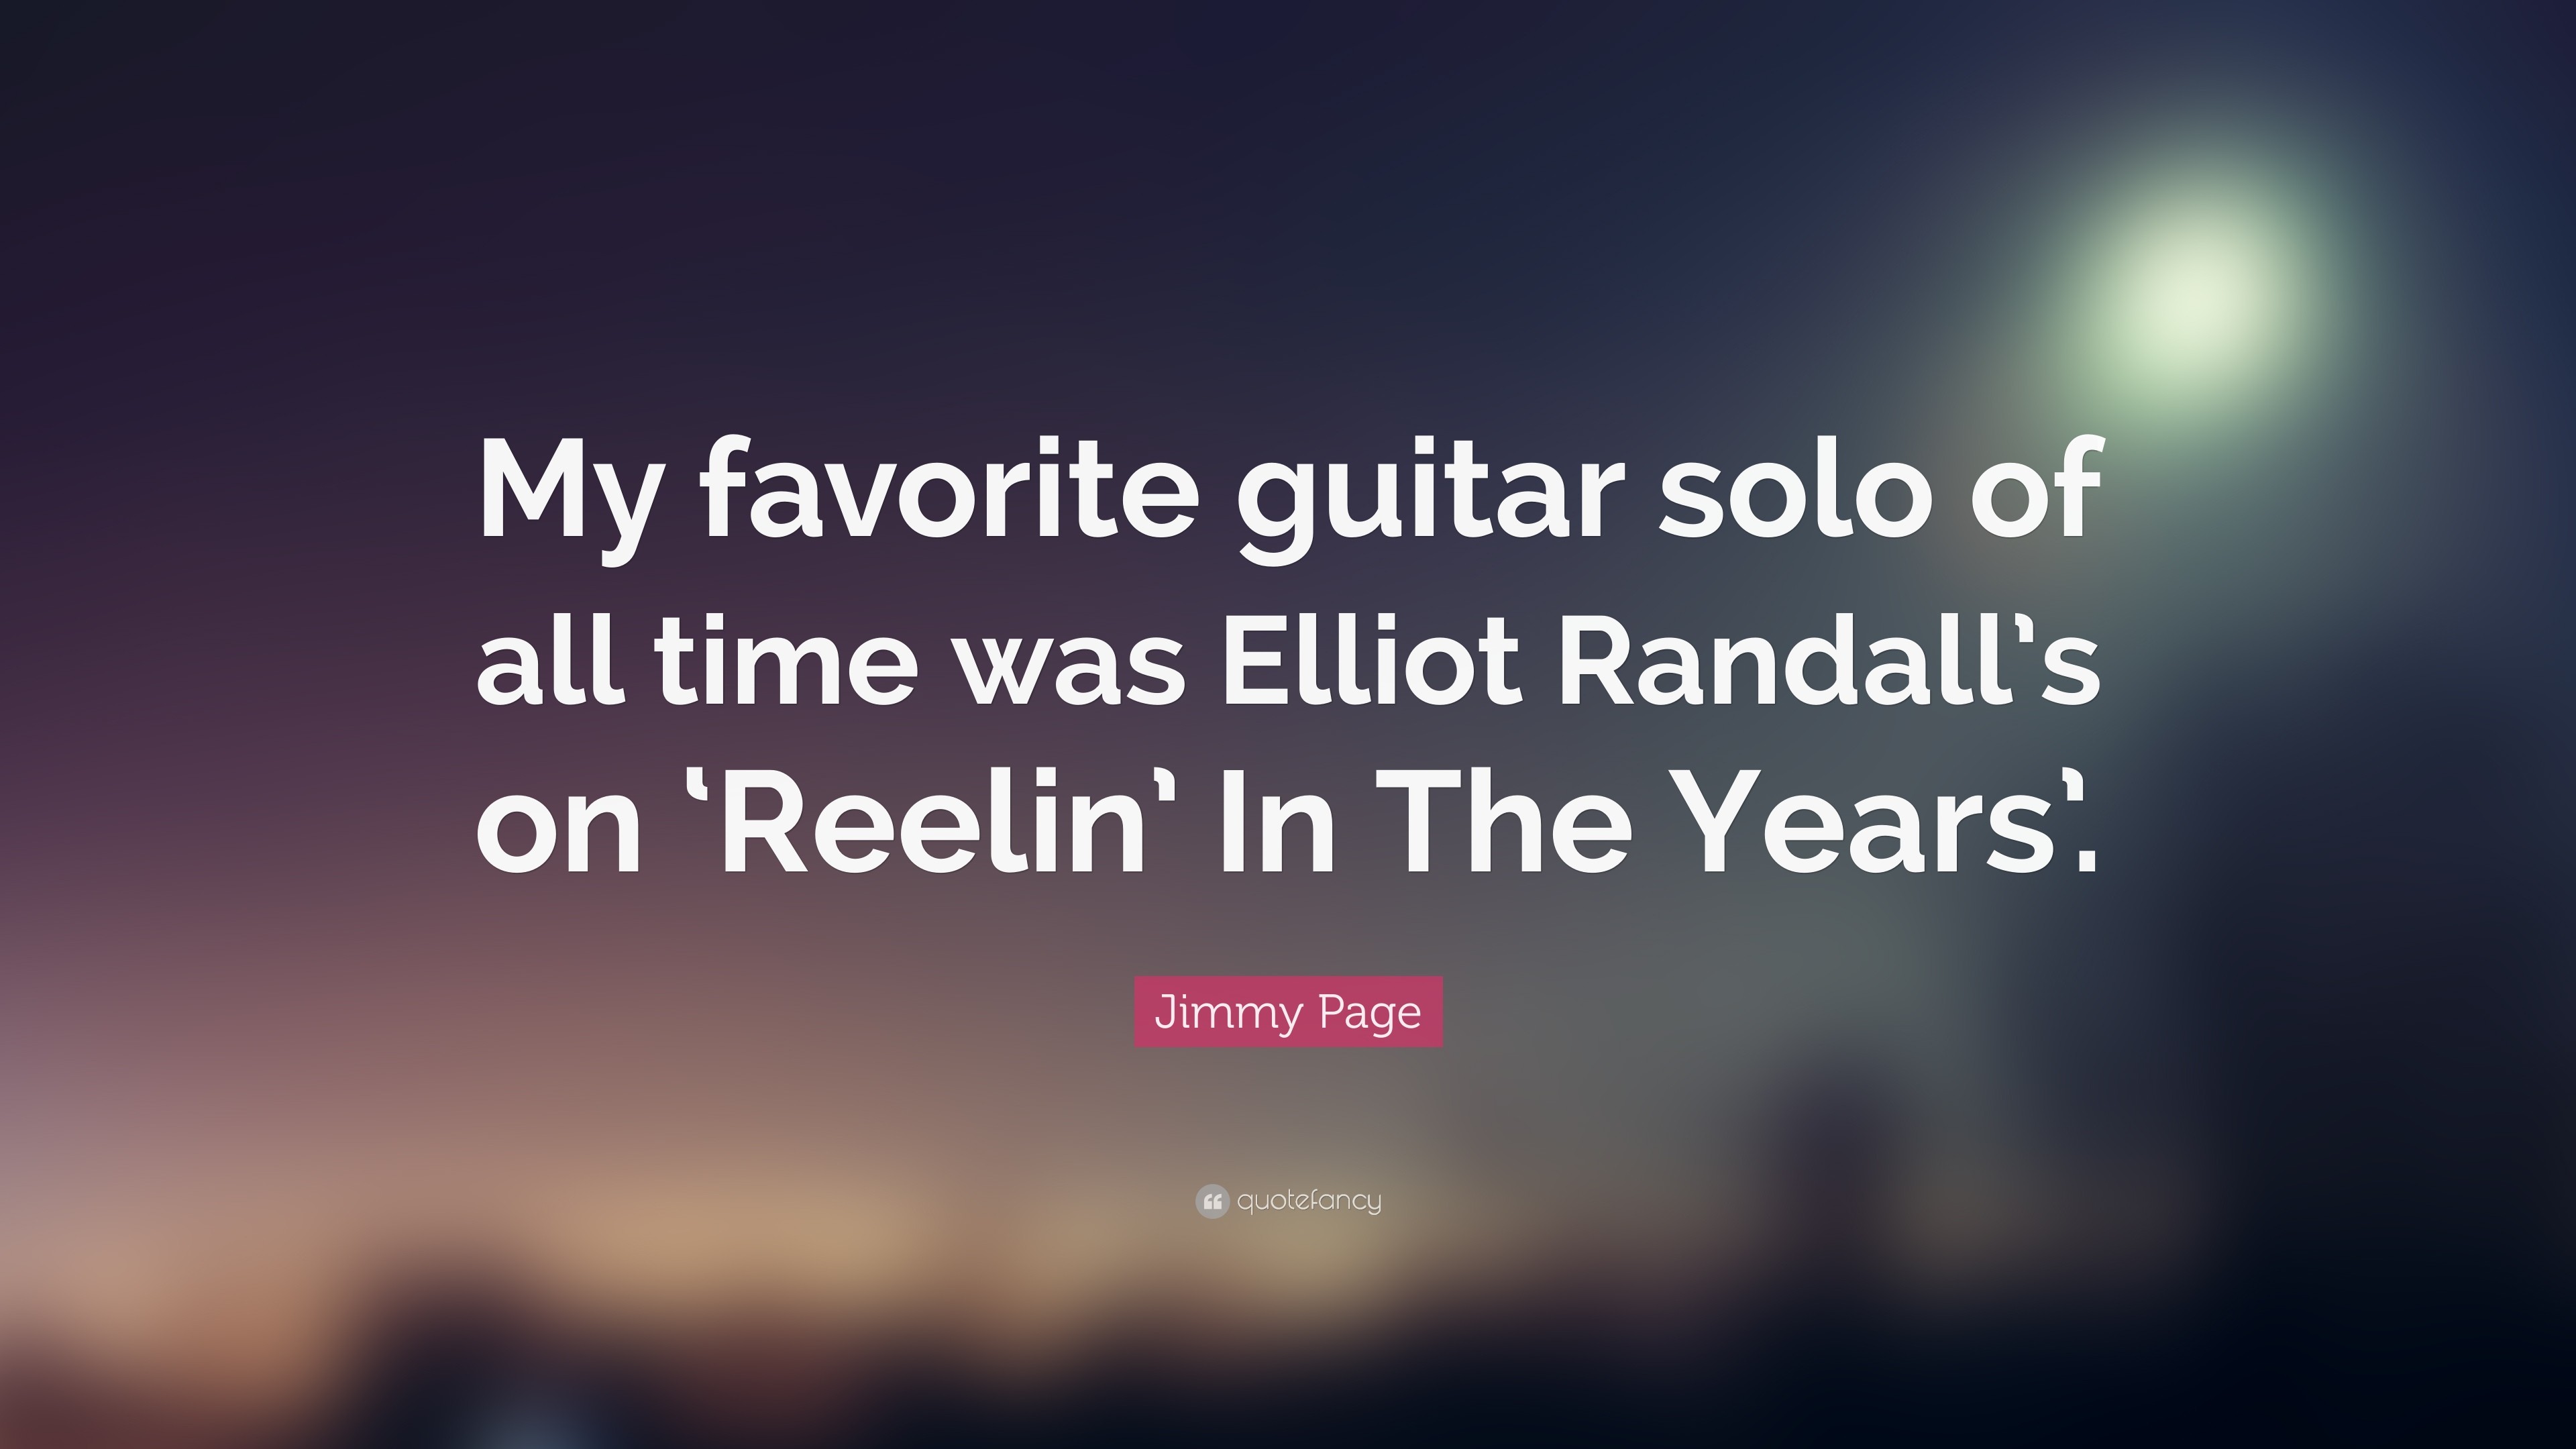 3840x2160 Jimmy Page Quote: “My favorite guitar solo of all time was Elliot Randall's  on